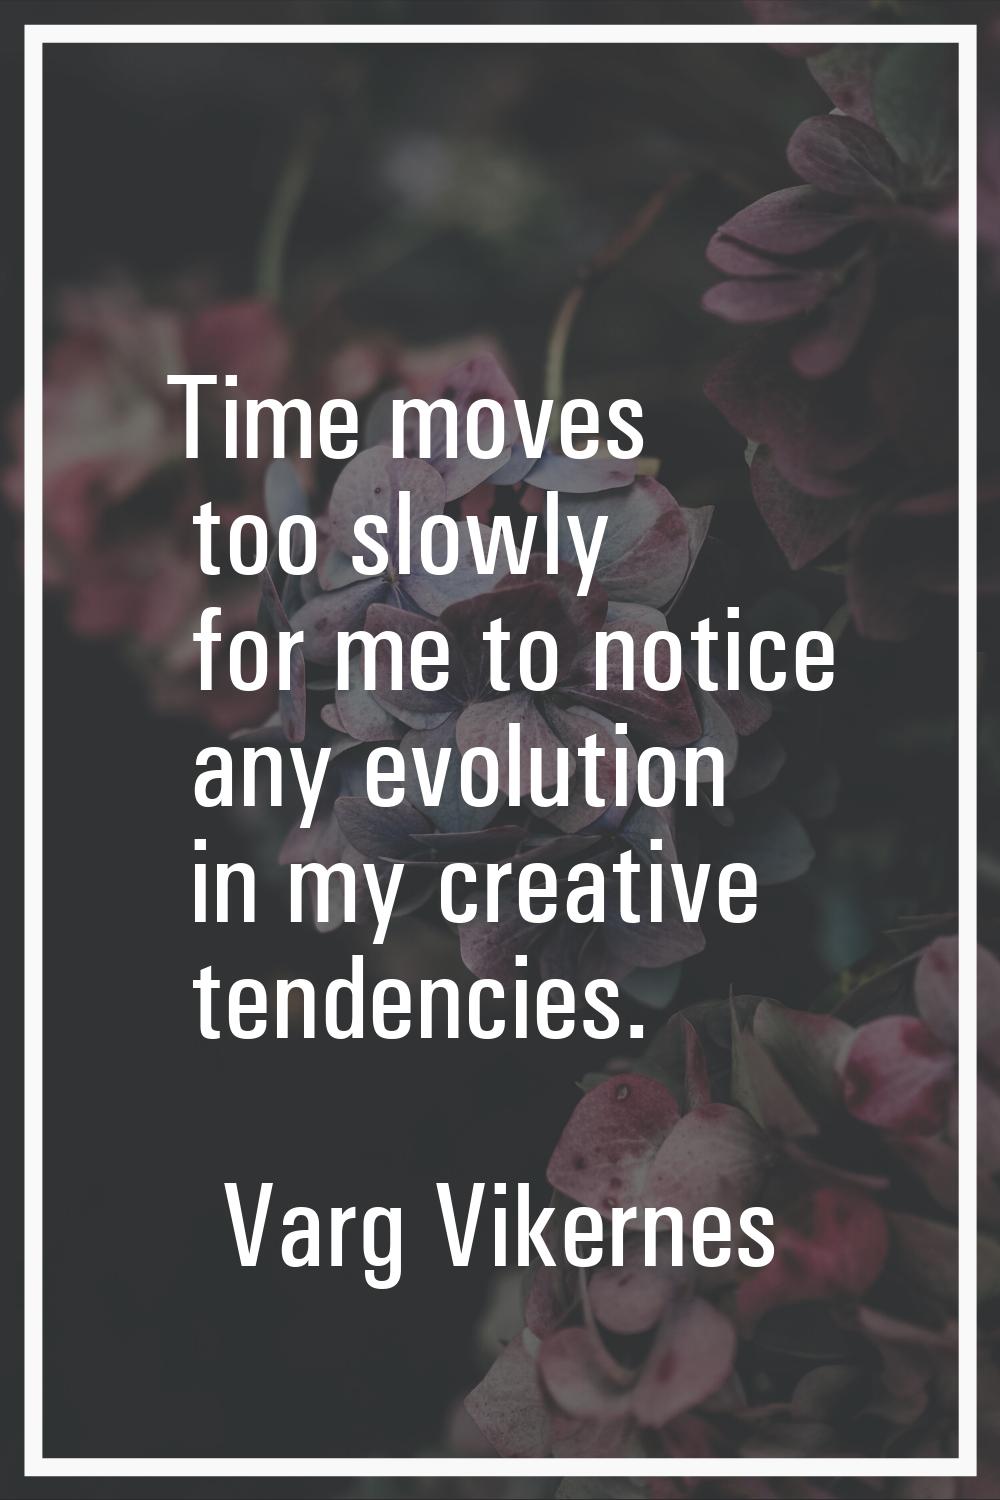 Time moves too slowly for me to notice any evolution in my creative tendencies.